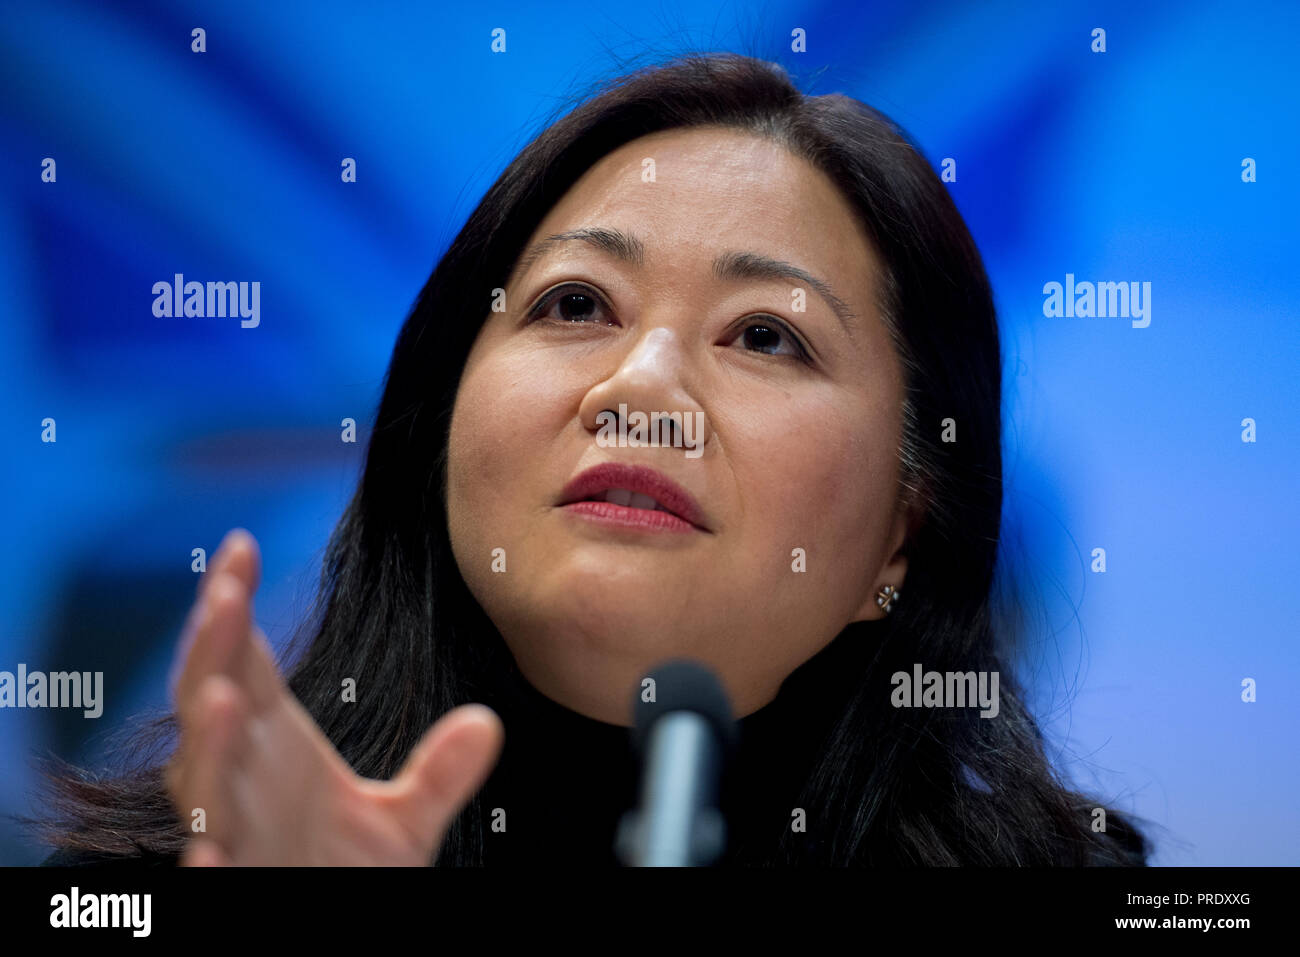 Birmingham, UK. 1st October 2018. Linda Yueh, economist, broadcaster, and author, speaks during The Spectator and Sky fringe event titled How Open Is Britain?, at the Conservative Party Conference in Birmingham. © Russell Hart/Alamy Live News. Stock Photo